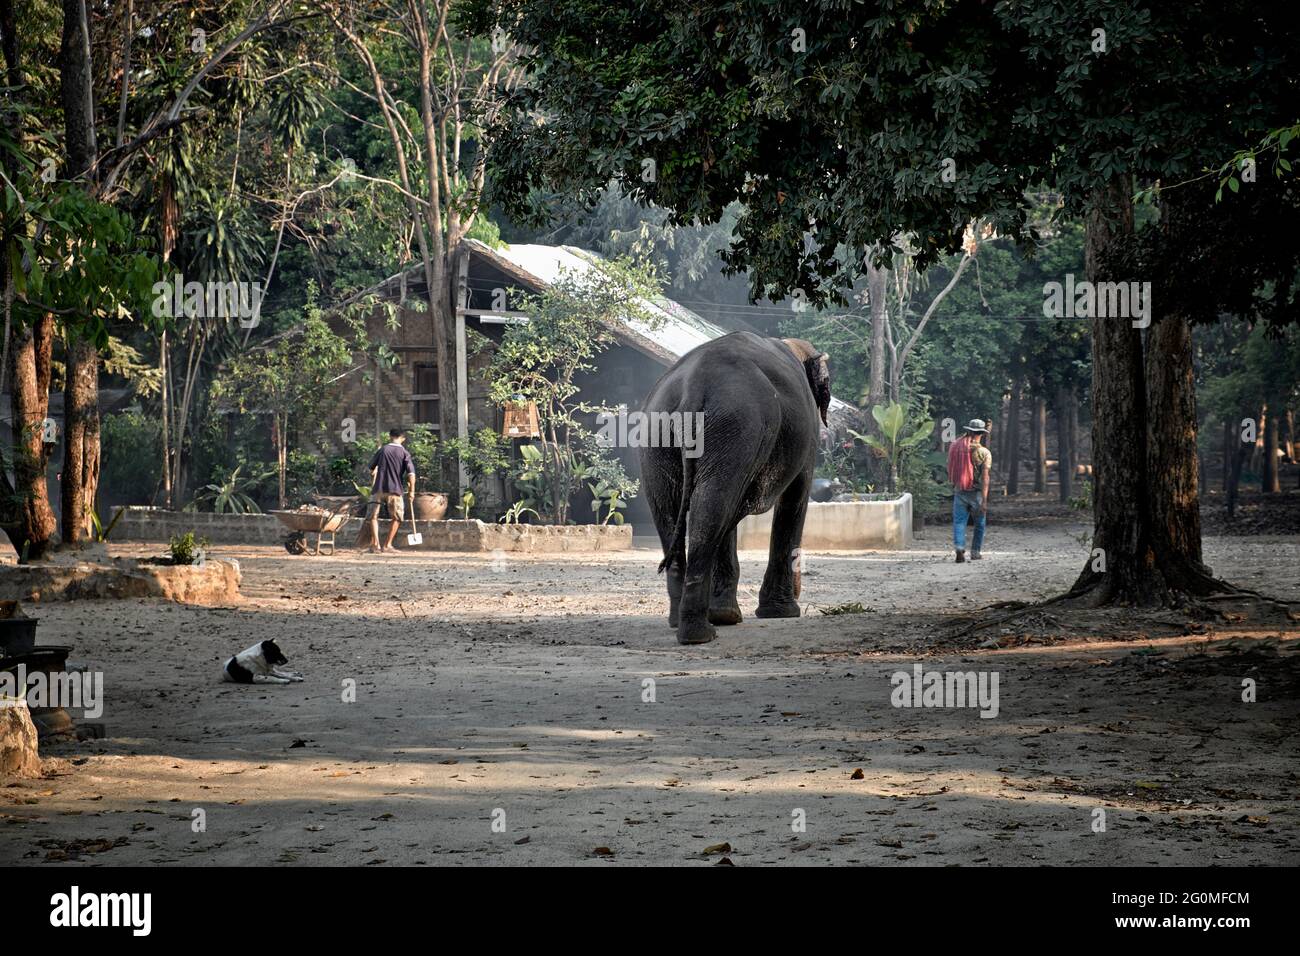 Elephant Thailand mahout. Rural Thailand village scene with elephant following mahout master. S. E. Asia Stock Photo